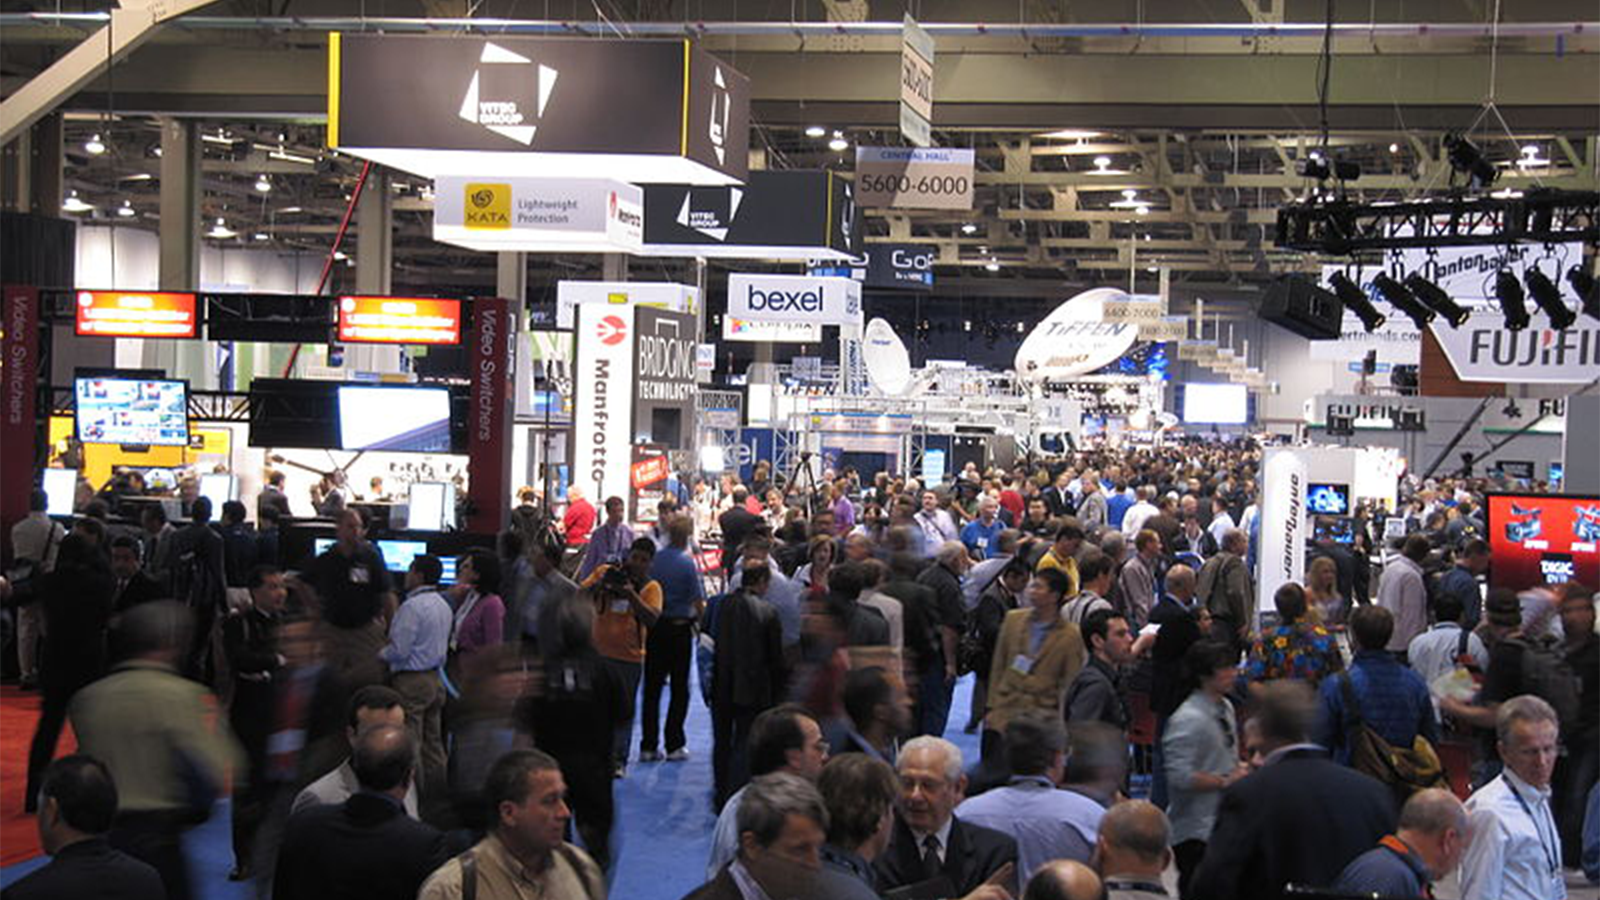 trade show floor, lots of people and logos everywhere